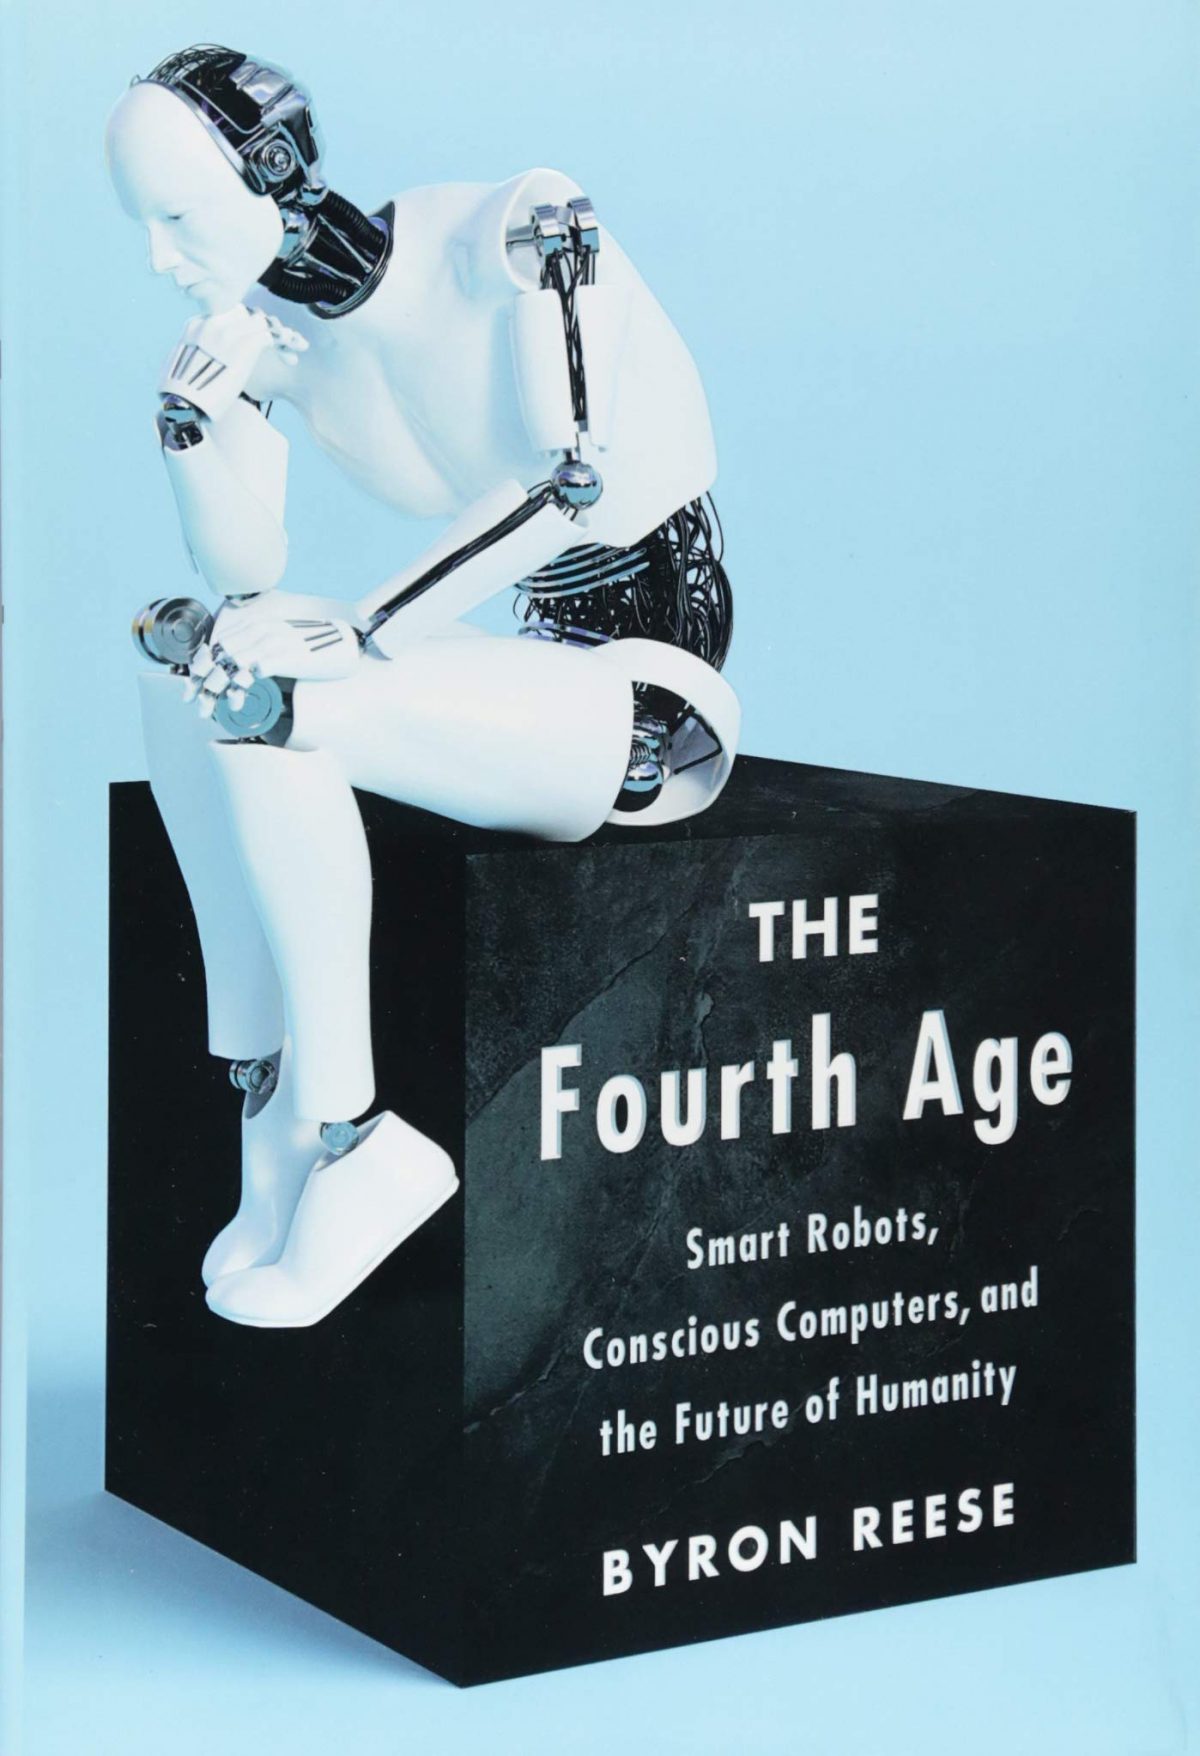 Book of the Day: The Fourth Age: Smart Robots, Conscious Computers, and the Future of Humanity